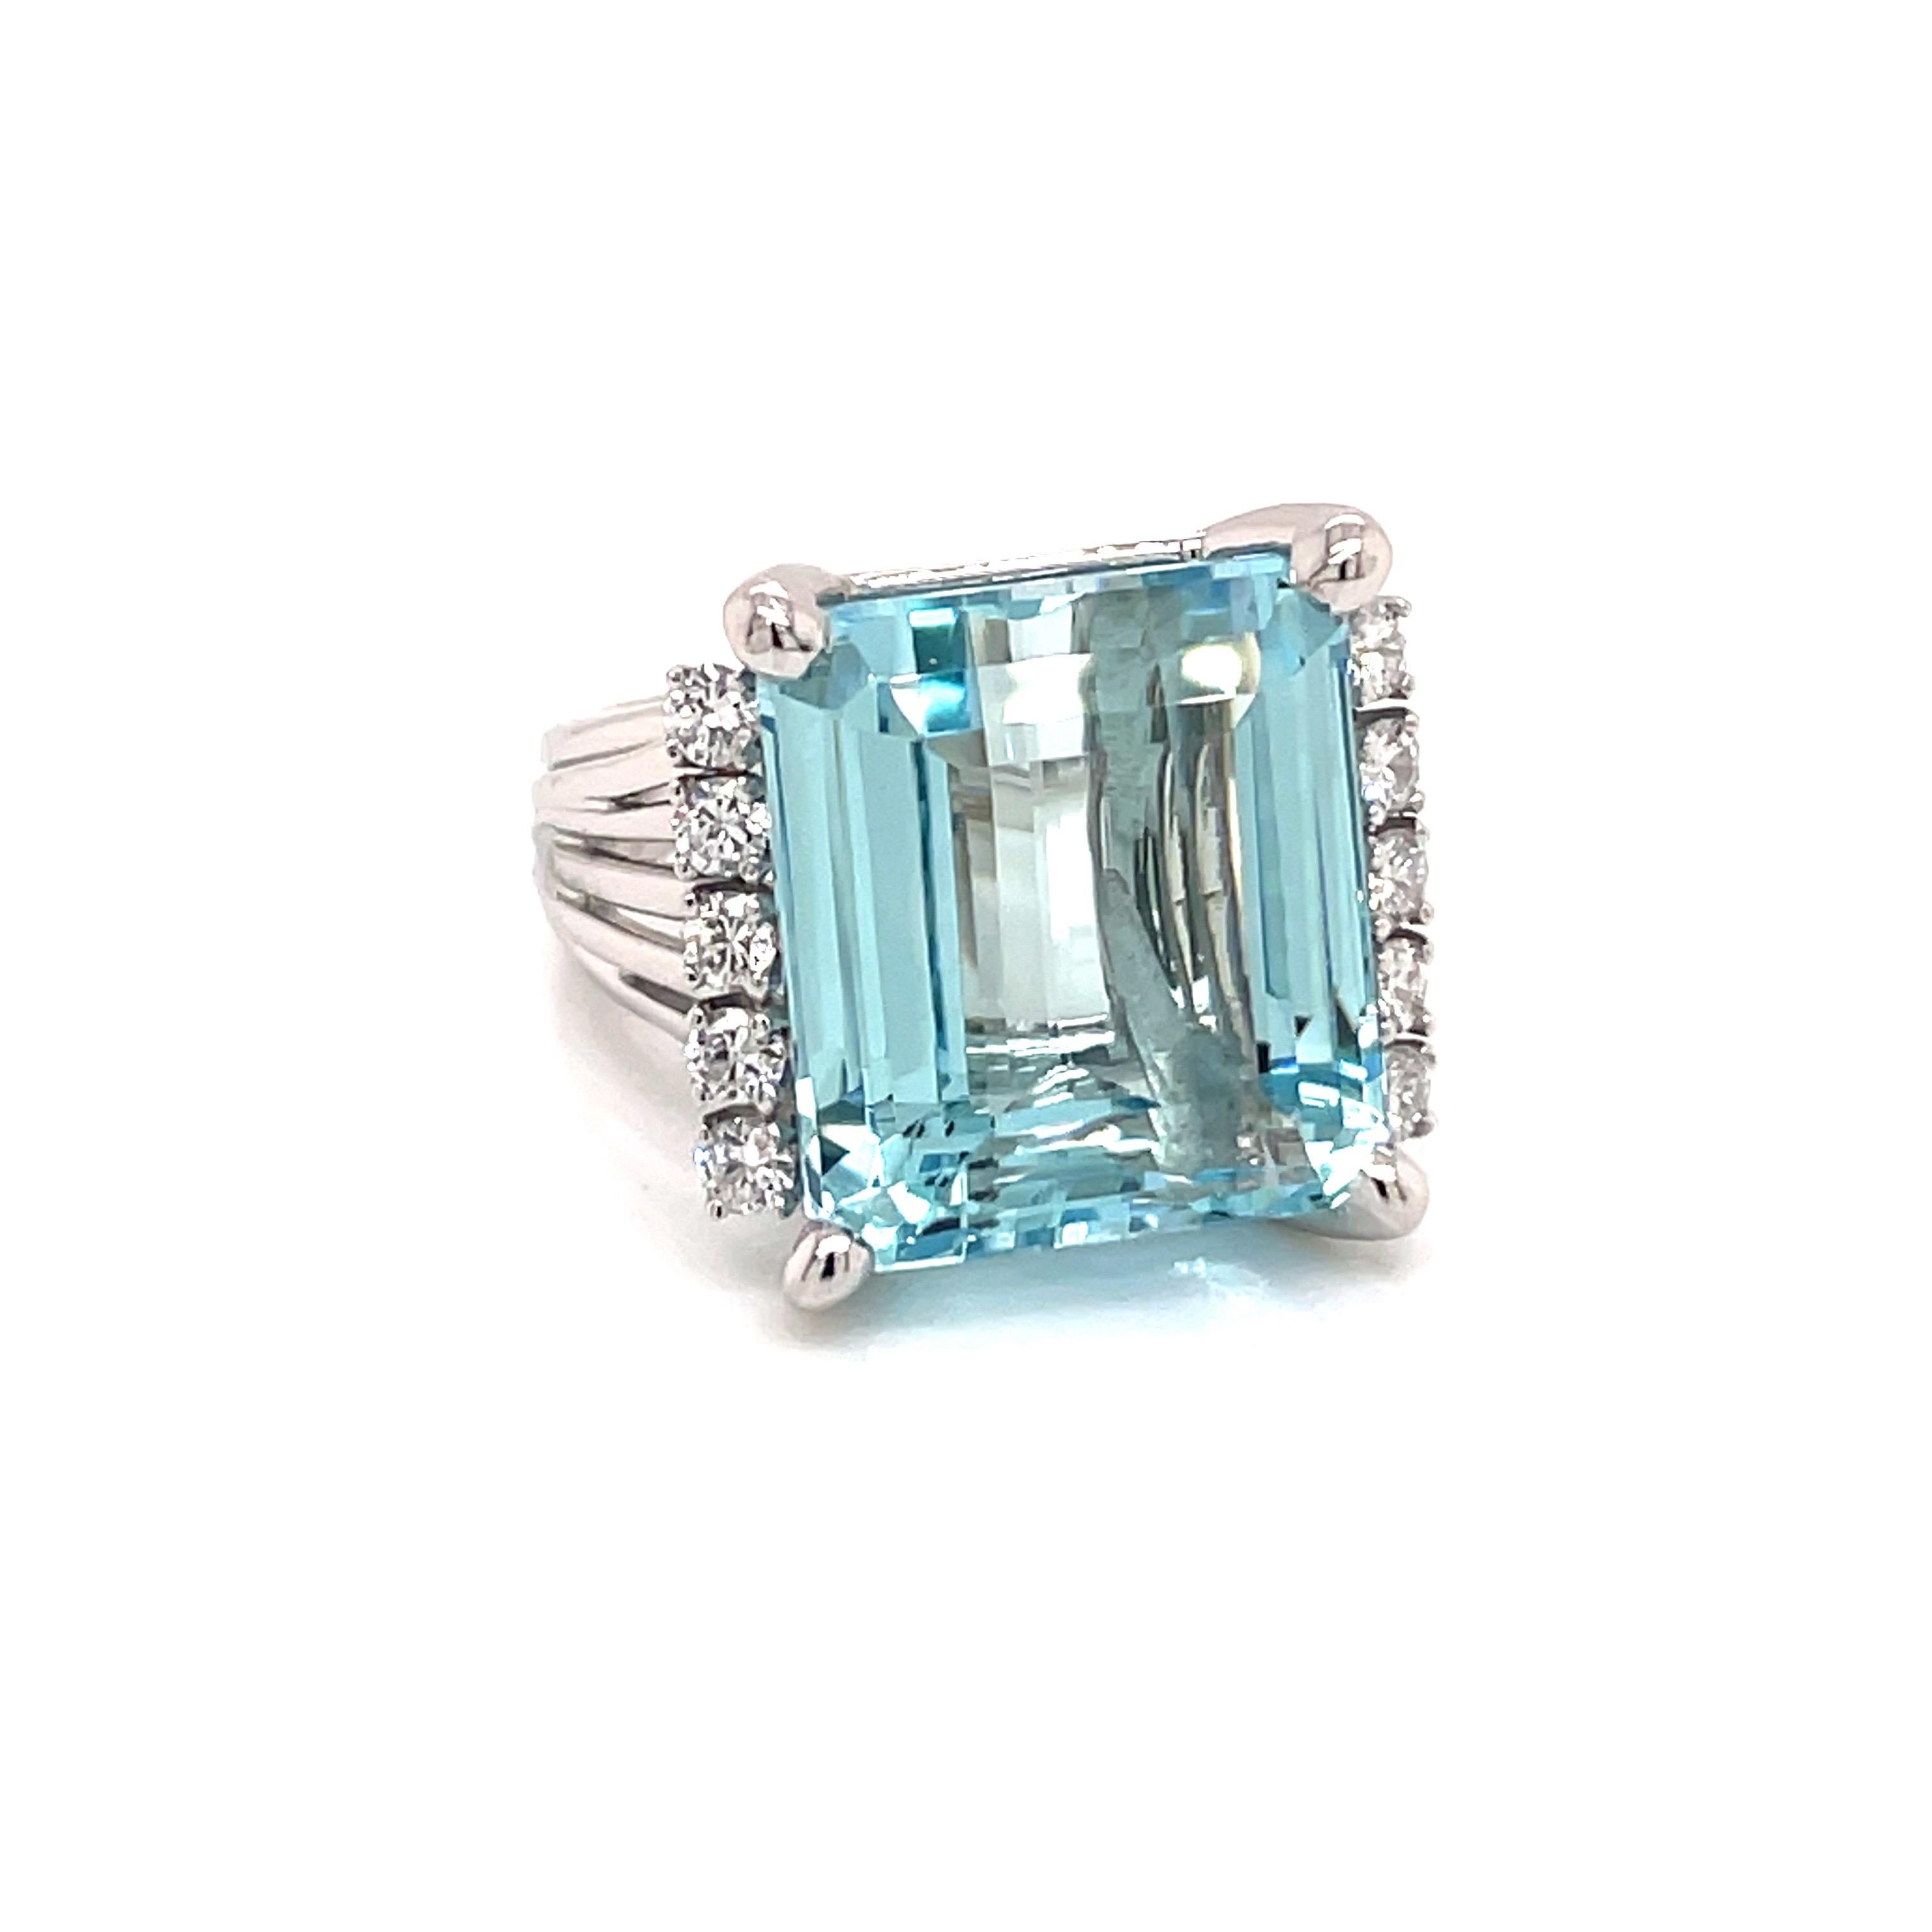 Vintage 1960's 17ct Emerald Cut Aquamarine Ring with Diamonds - The aquarmarine weighs approximately 17ct and measures 15.6 x 14.2mm.  It is accented with 10 round brilliant diamonds weighing approximately .50ct with G color and VS2 clarity.  The